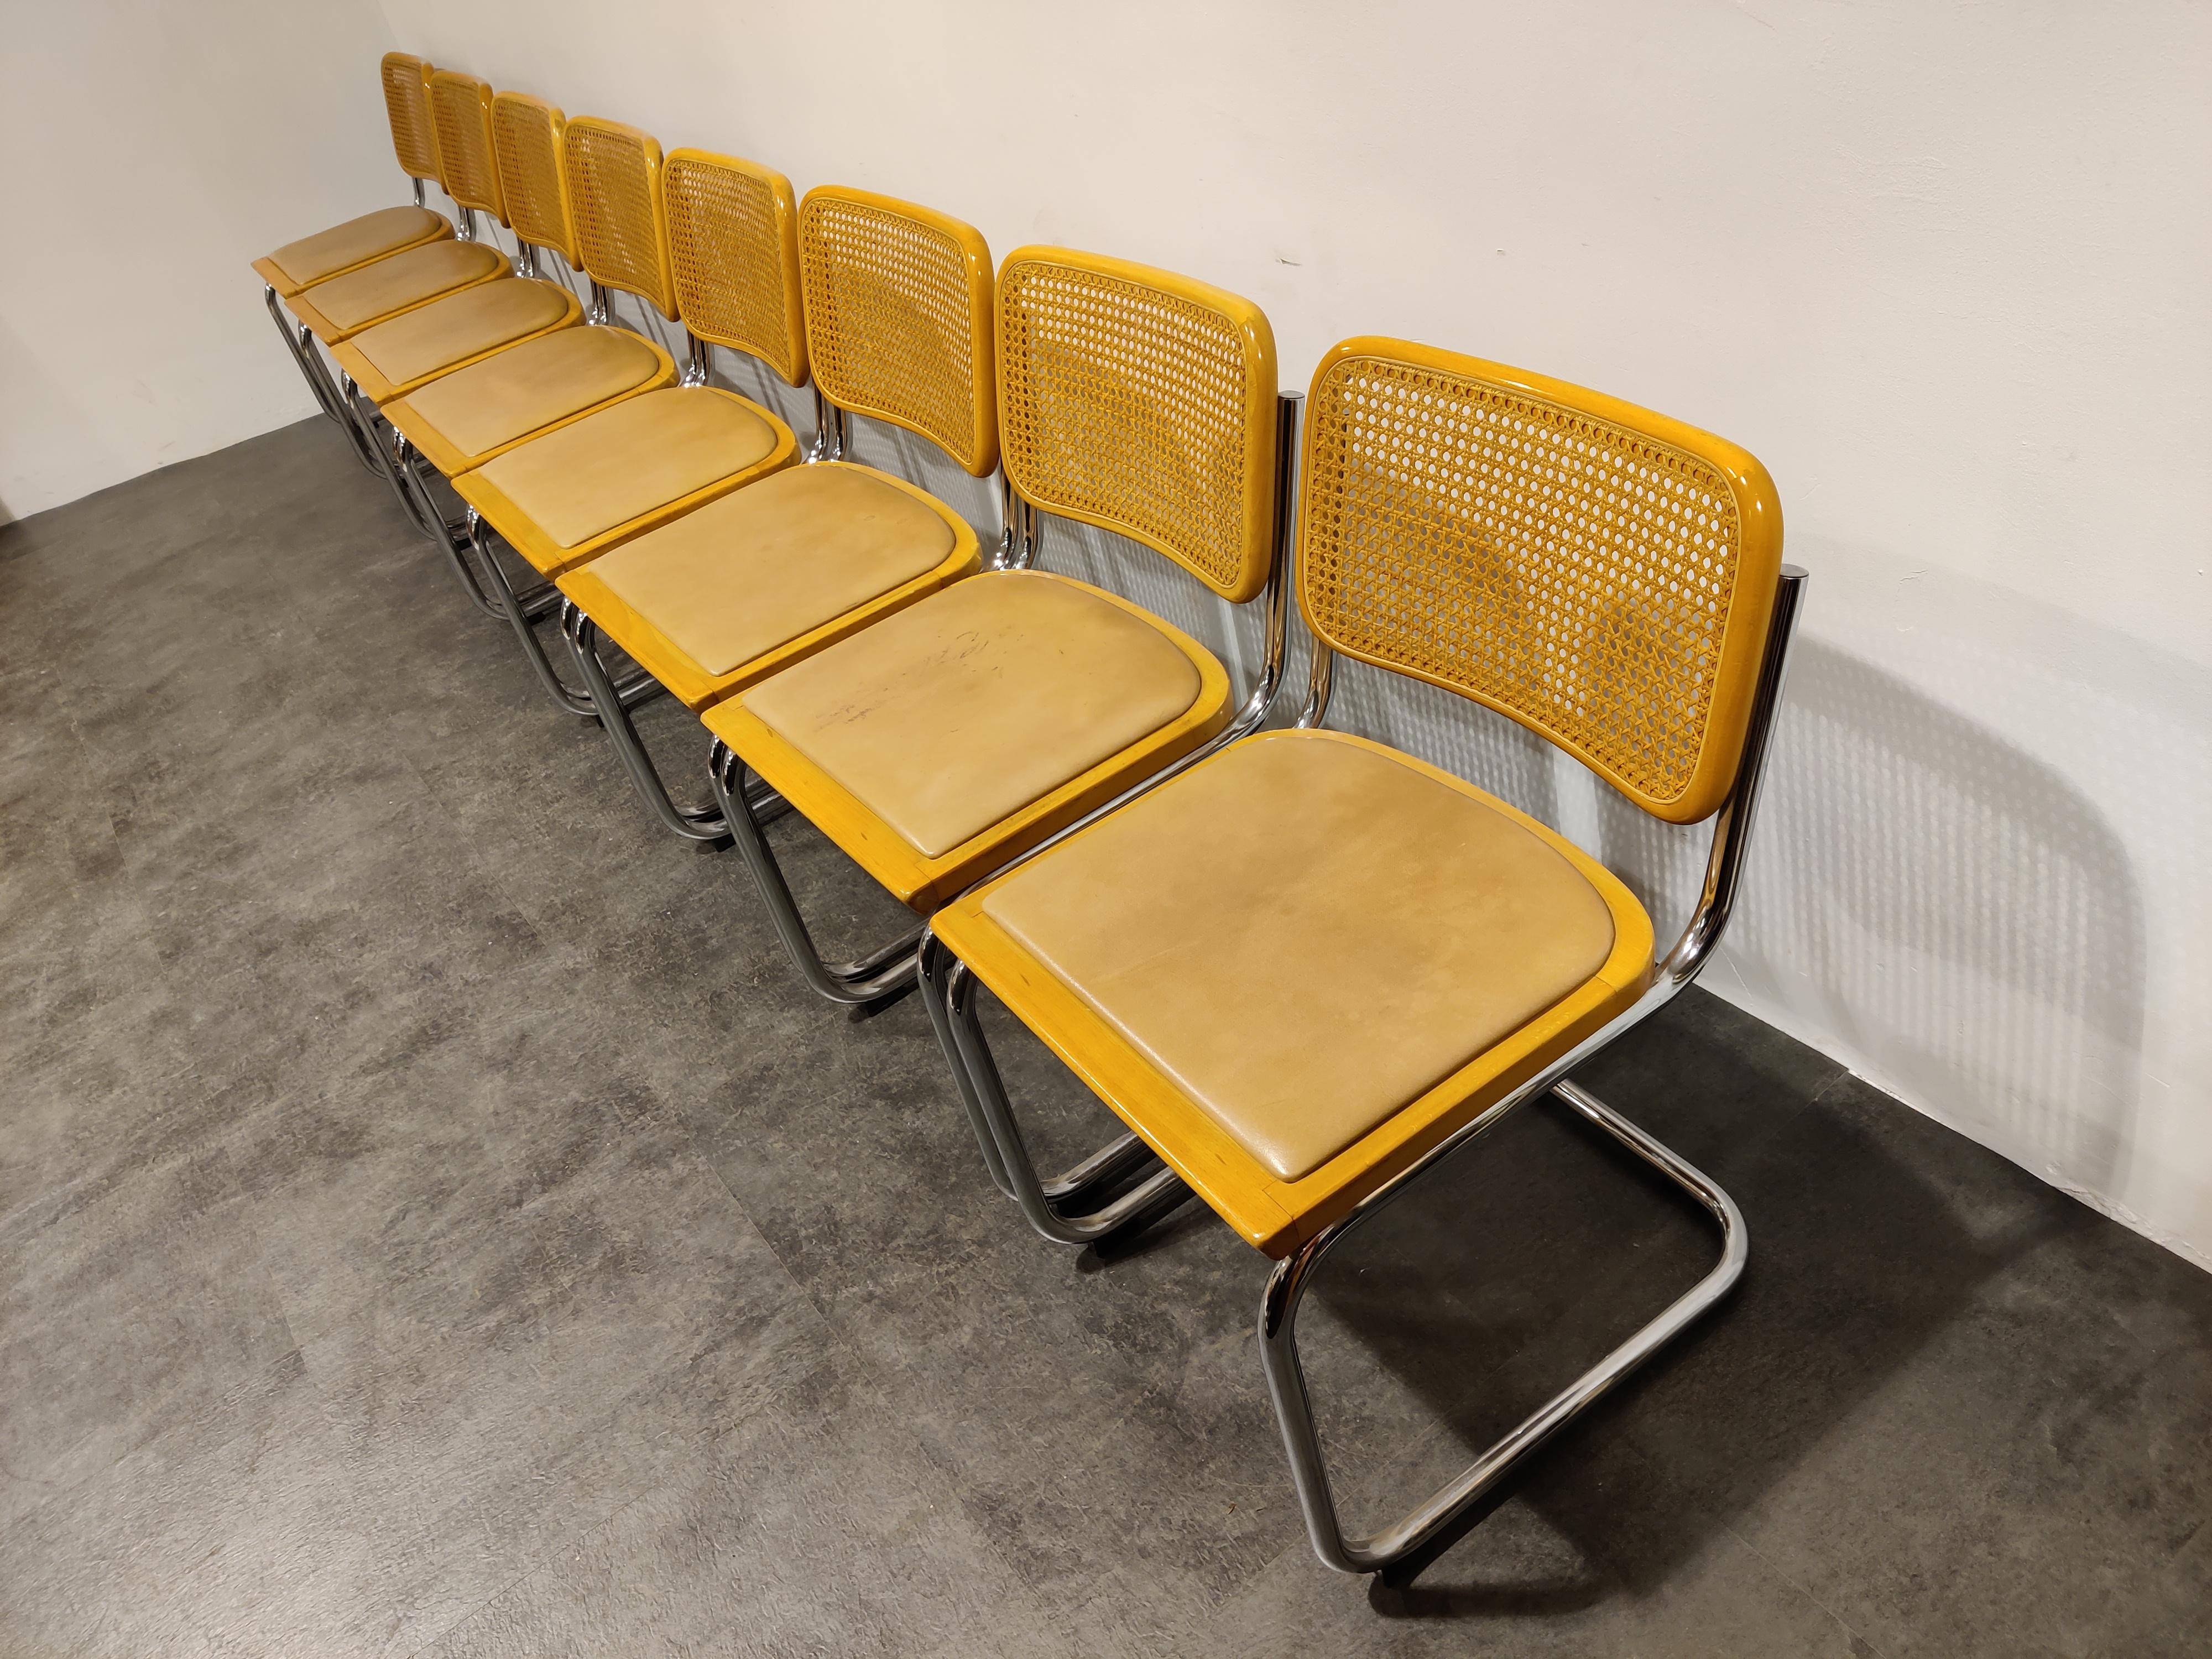 Bauhaus Vintage Marcel Breuer Cesca Style Chairs Set of 8, Made in Italy, 1970s